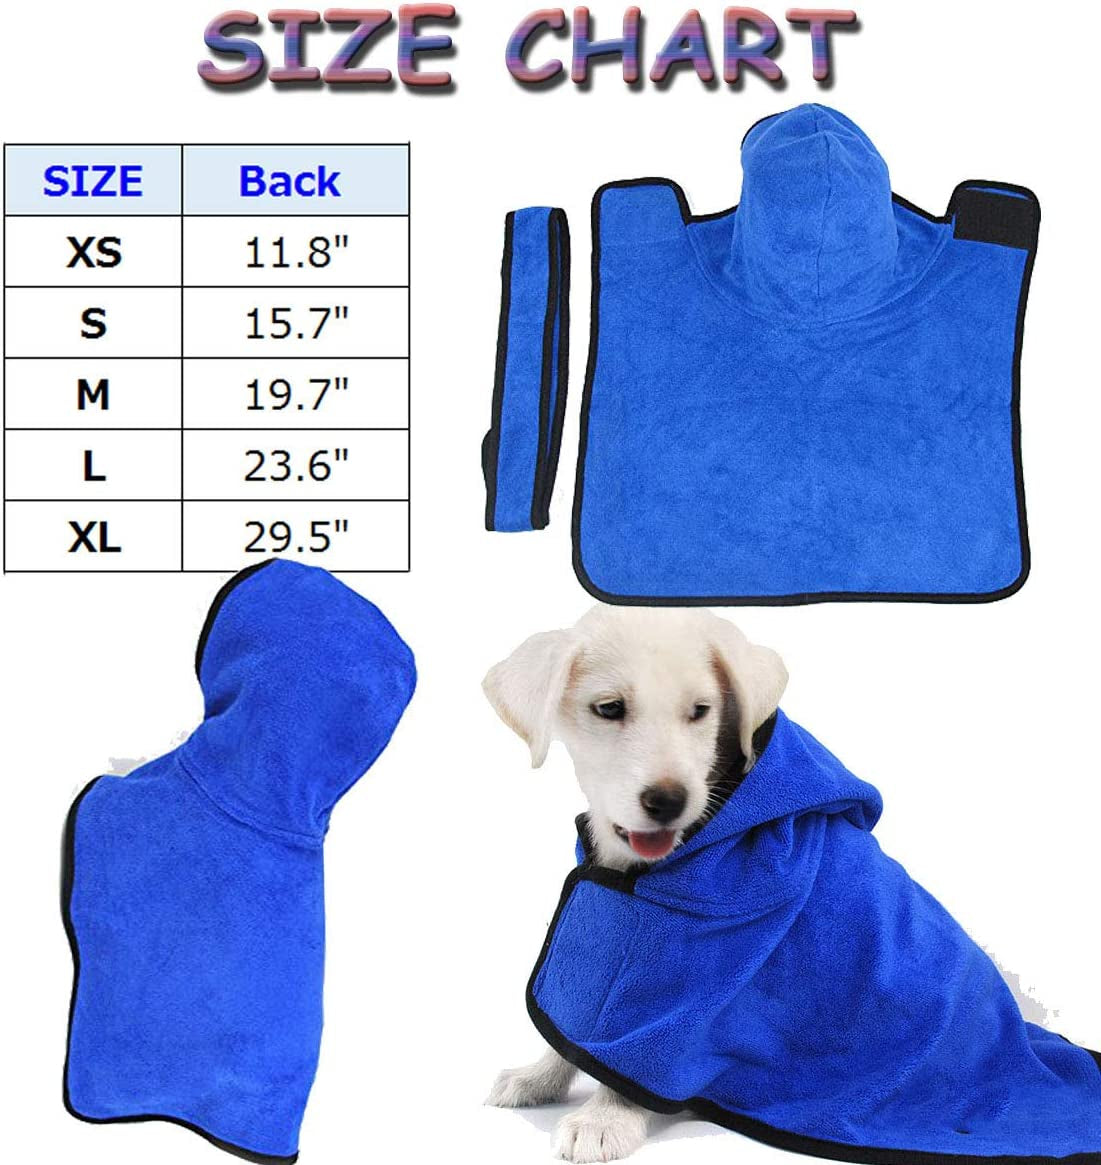 Microfiber Dog Bathrobe, Quick Drying Pet Bath Robe, Pets Super Absorbent Towel for Dogs and Cats, Machine Washable-Blue